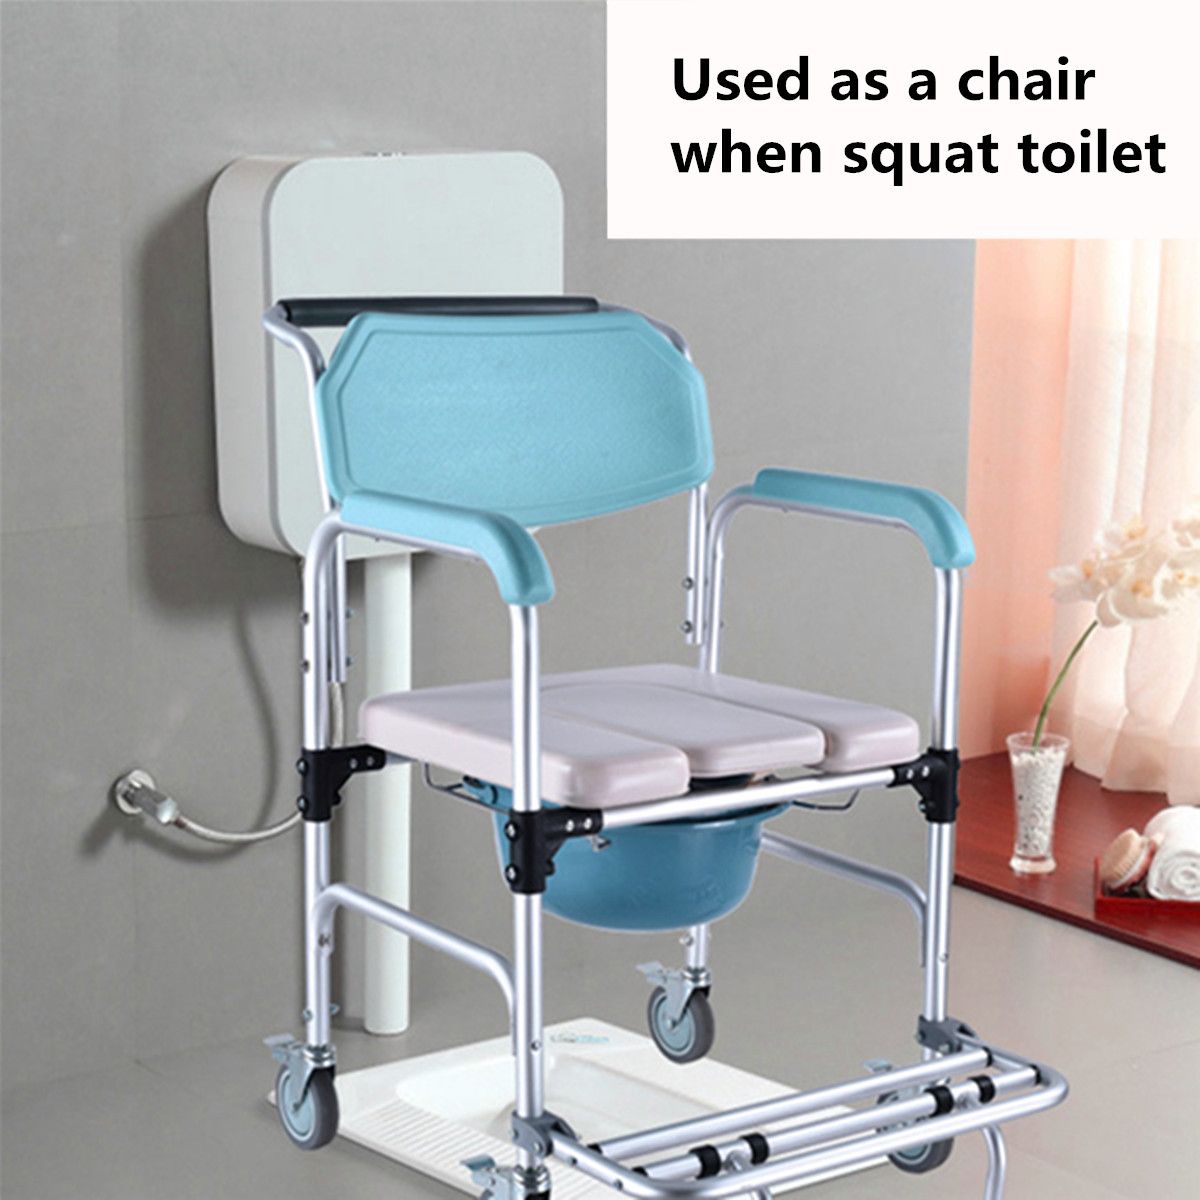 3-in-1-Commode-Wheelchair-Bedside-Toilet-amp-Shower-Seat-Bathroom-Rolling-Chair-Elder-Folding-Chair-1297786